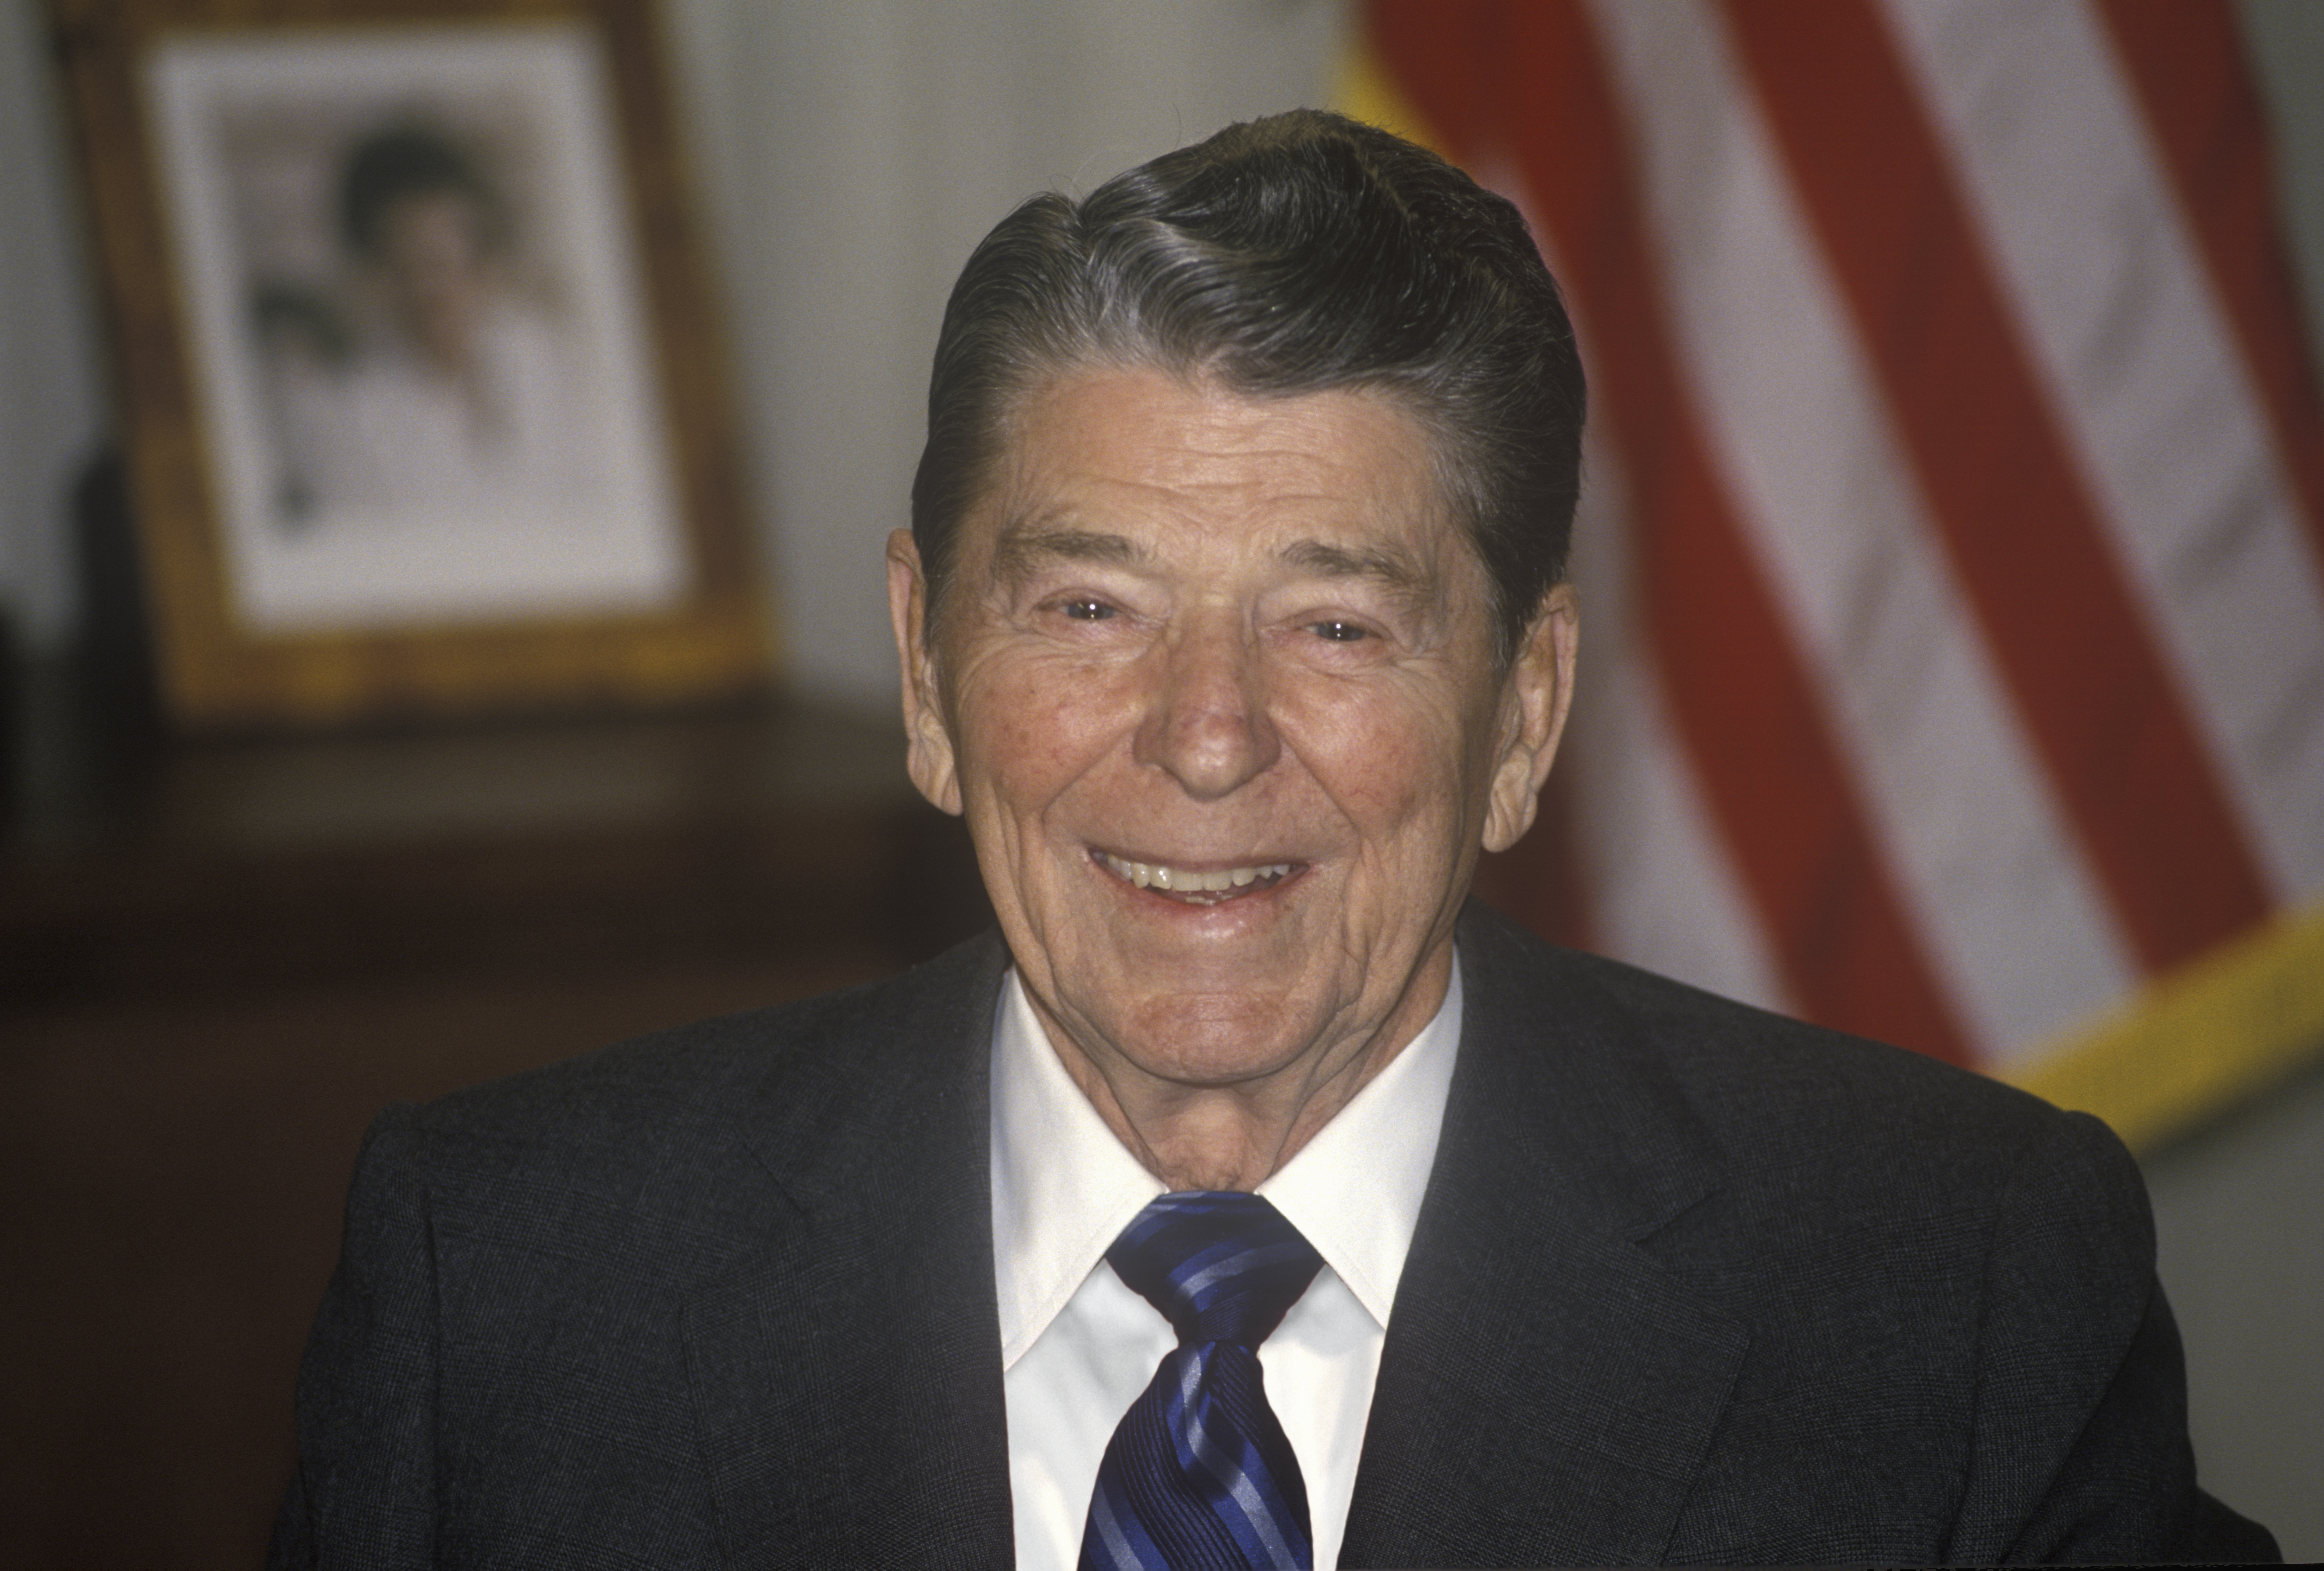 Ronald Reagan, who made his share of president etiquette gaffes. 